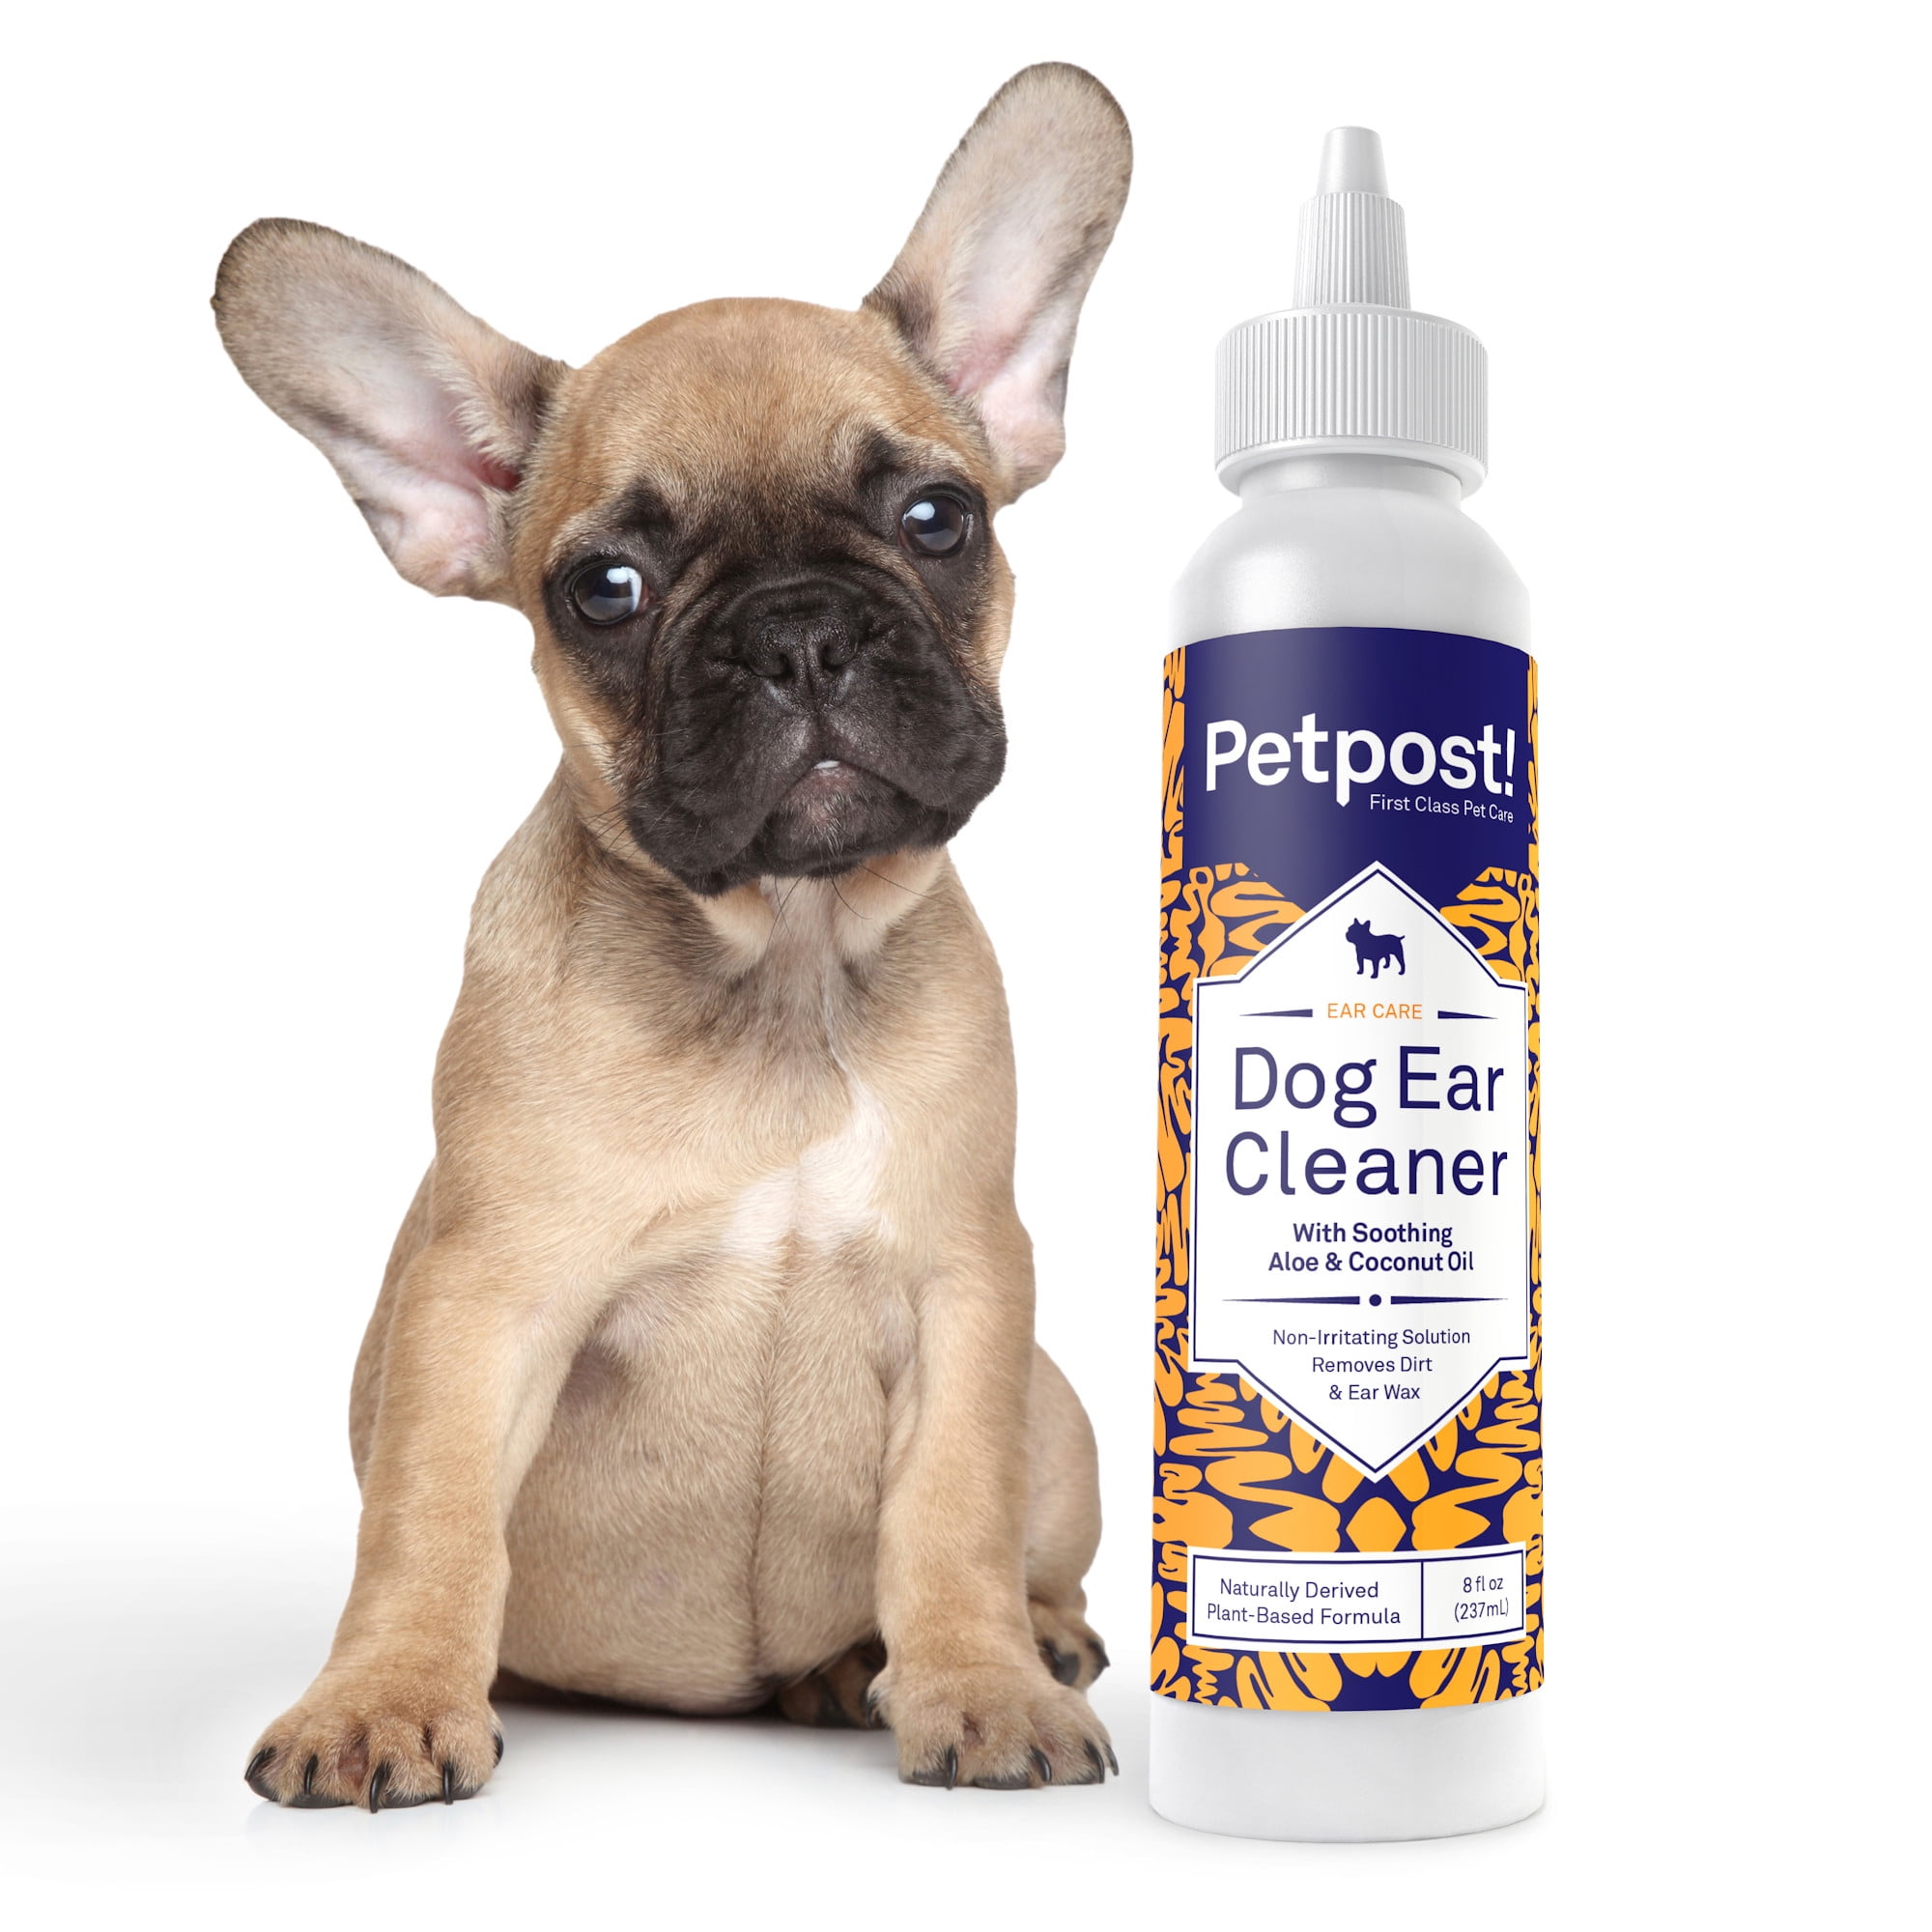 does coconut oil kill ear mites in dogs